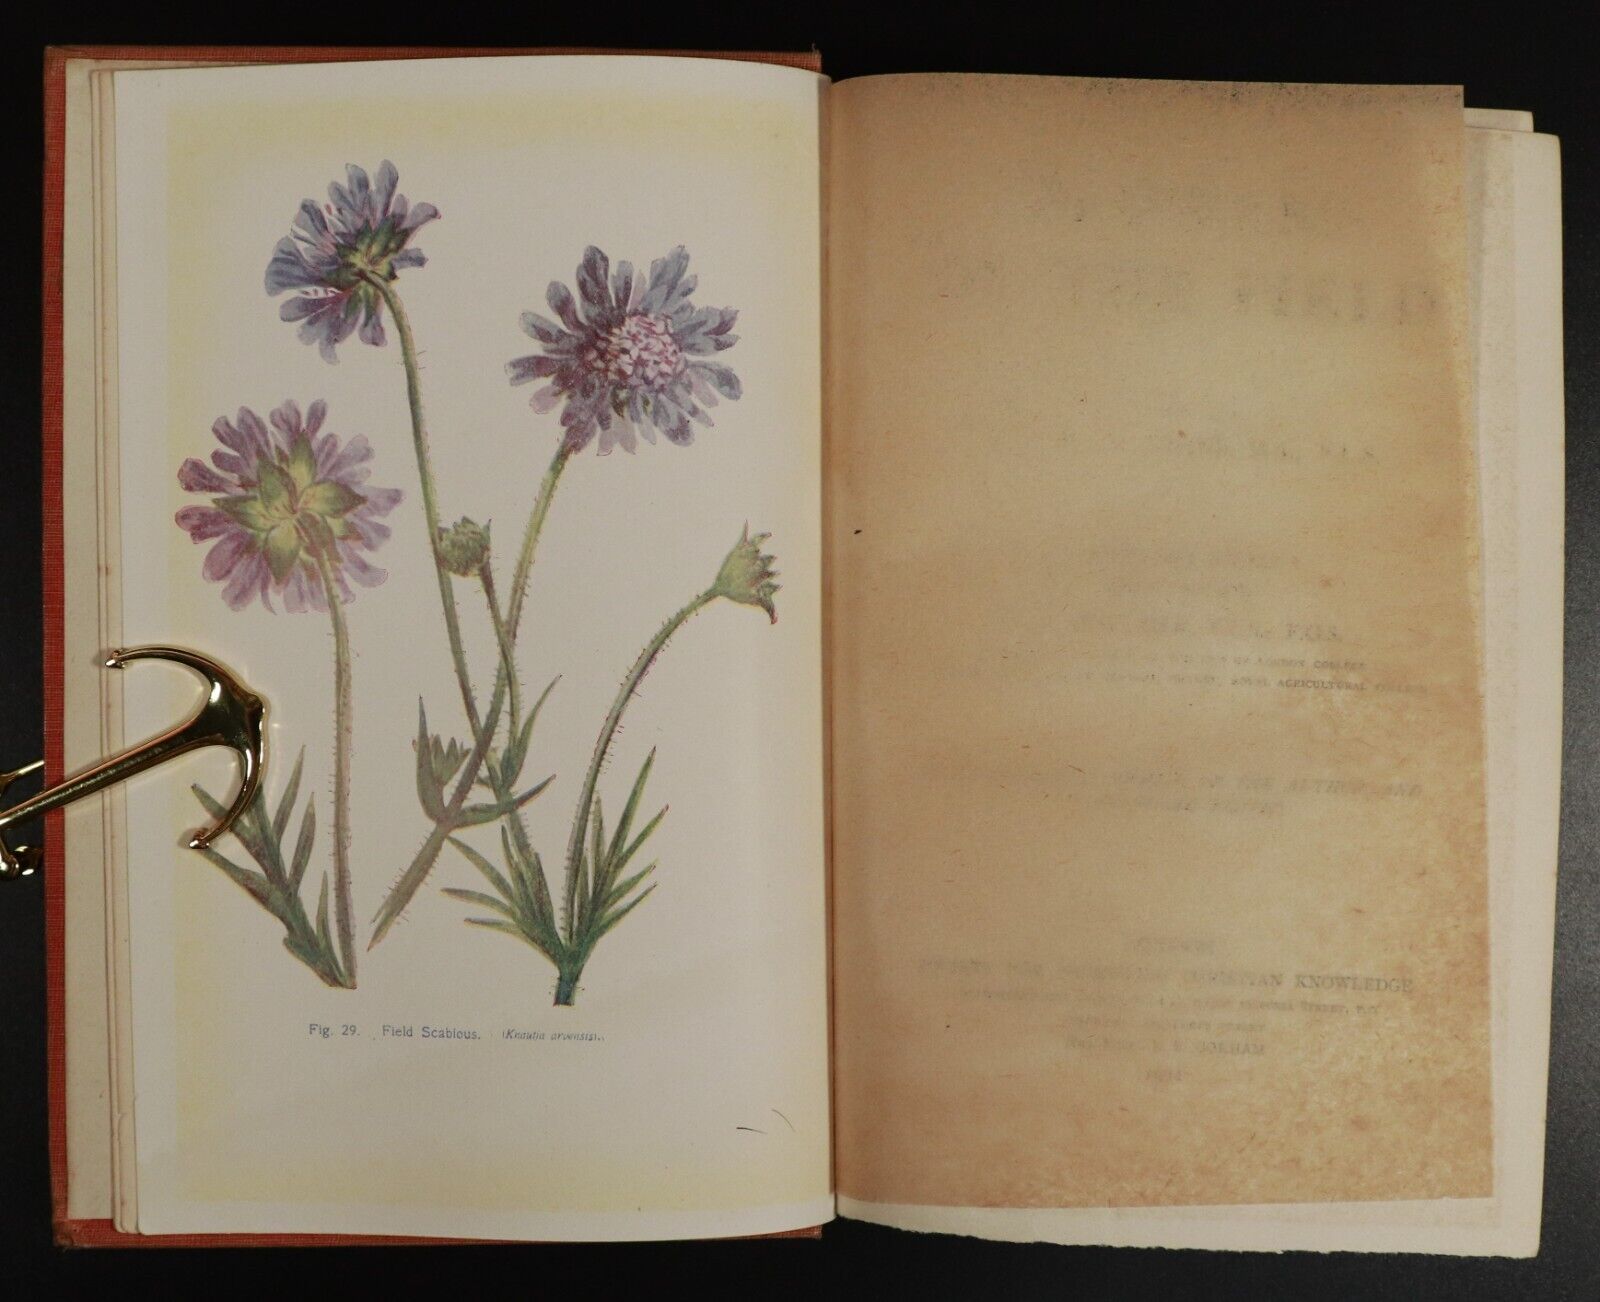 1911 Flowers Of The Field by C.A Johns Antique Flora Reference Book - 0